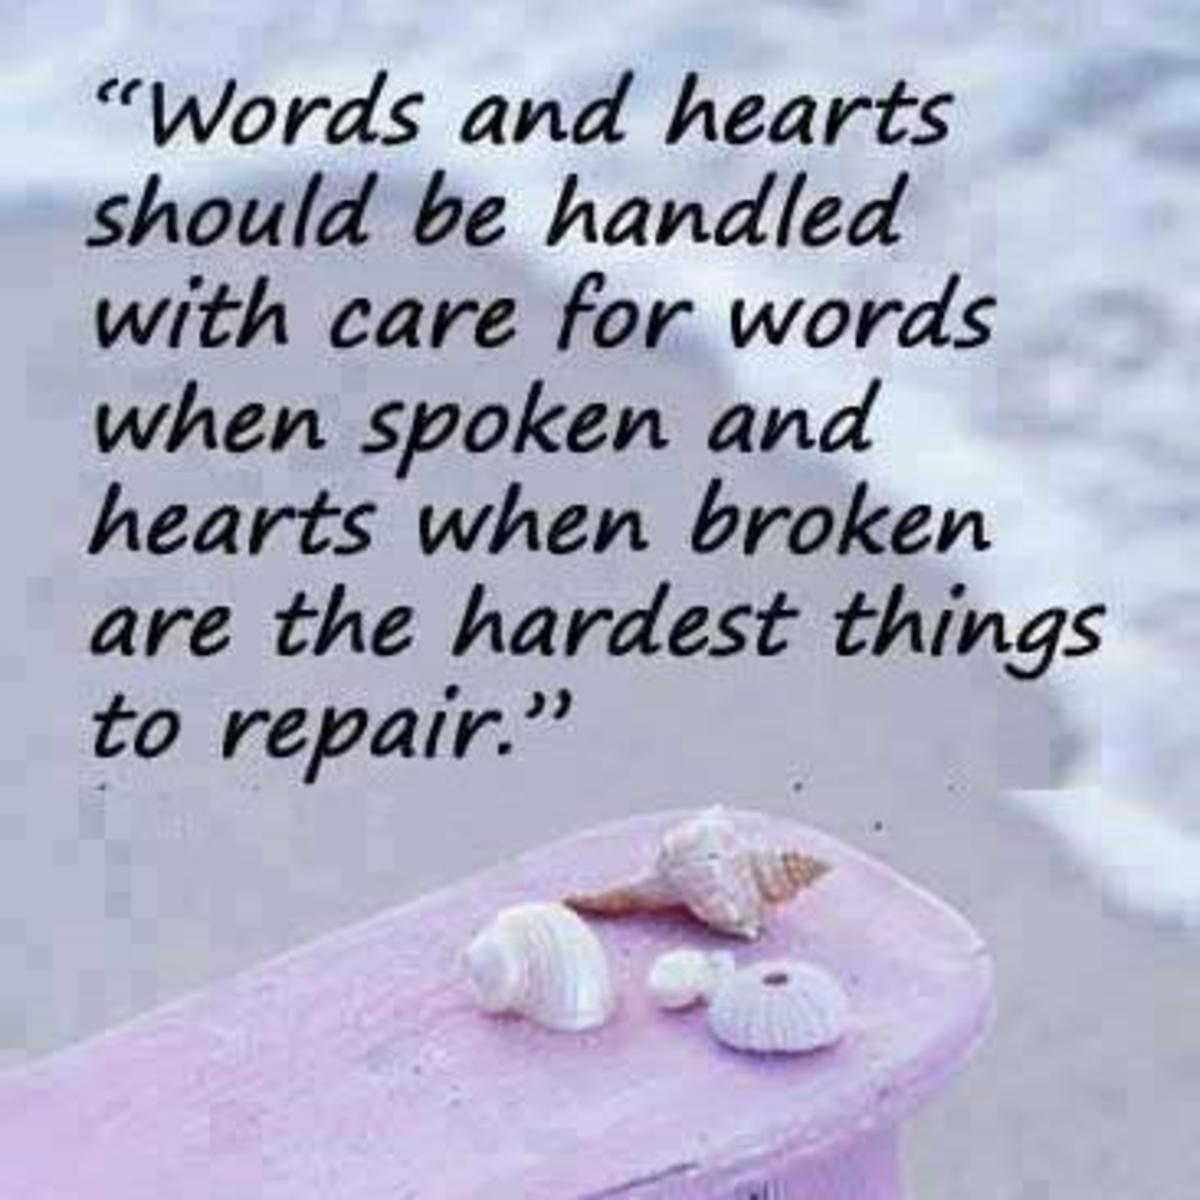 Handle your words with care